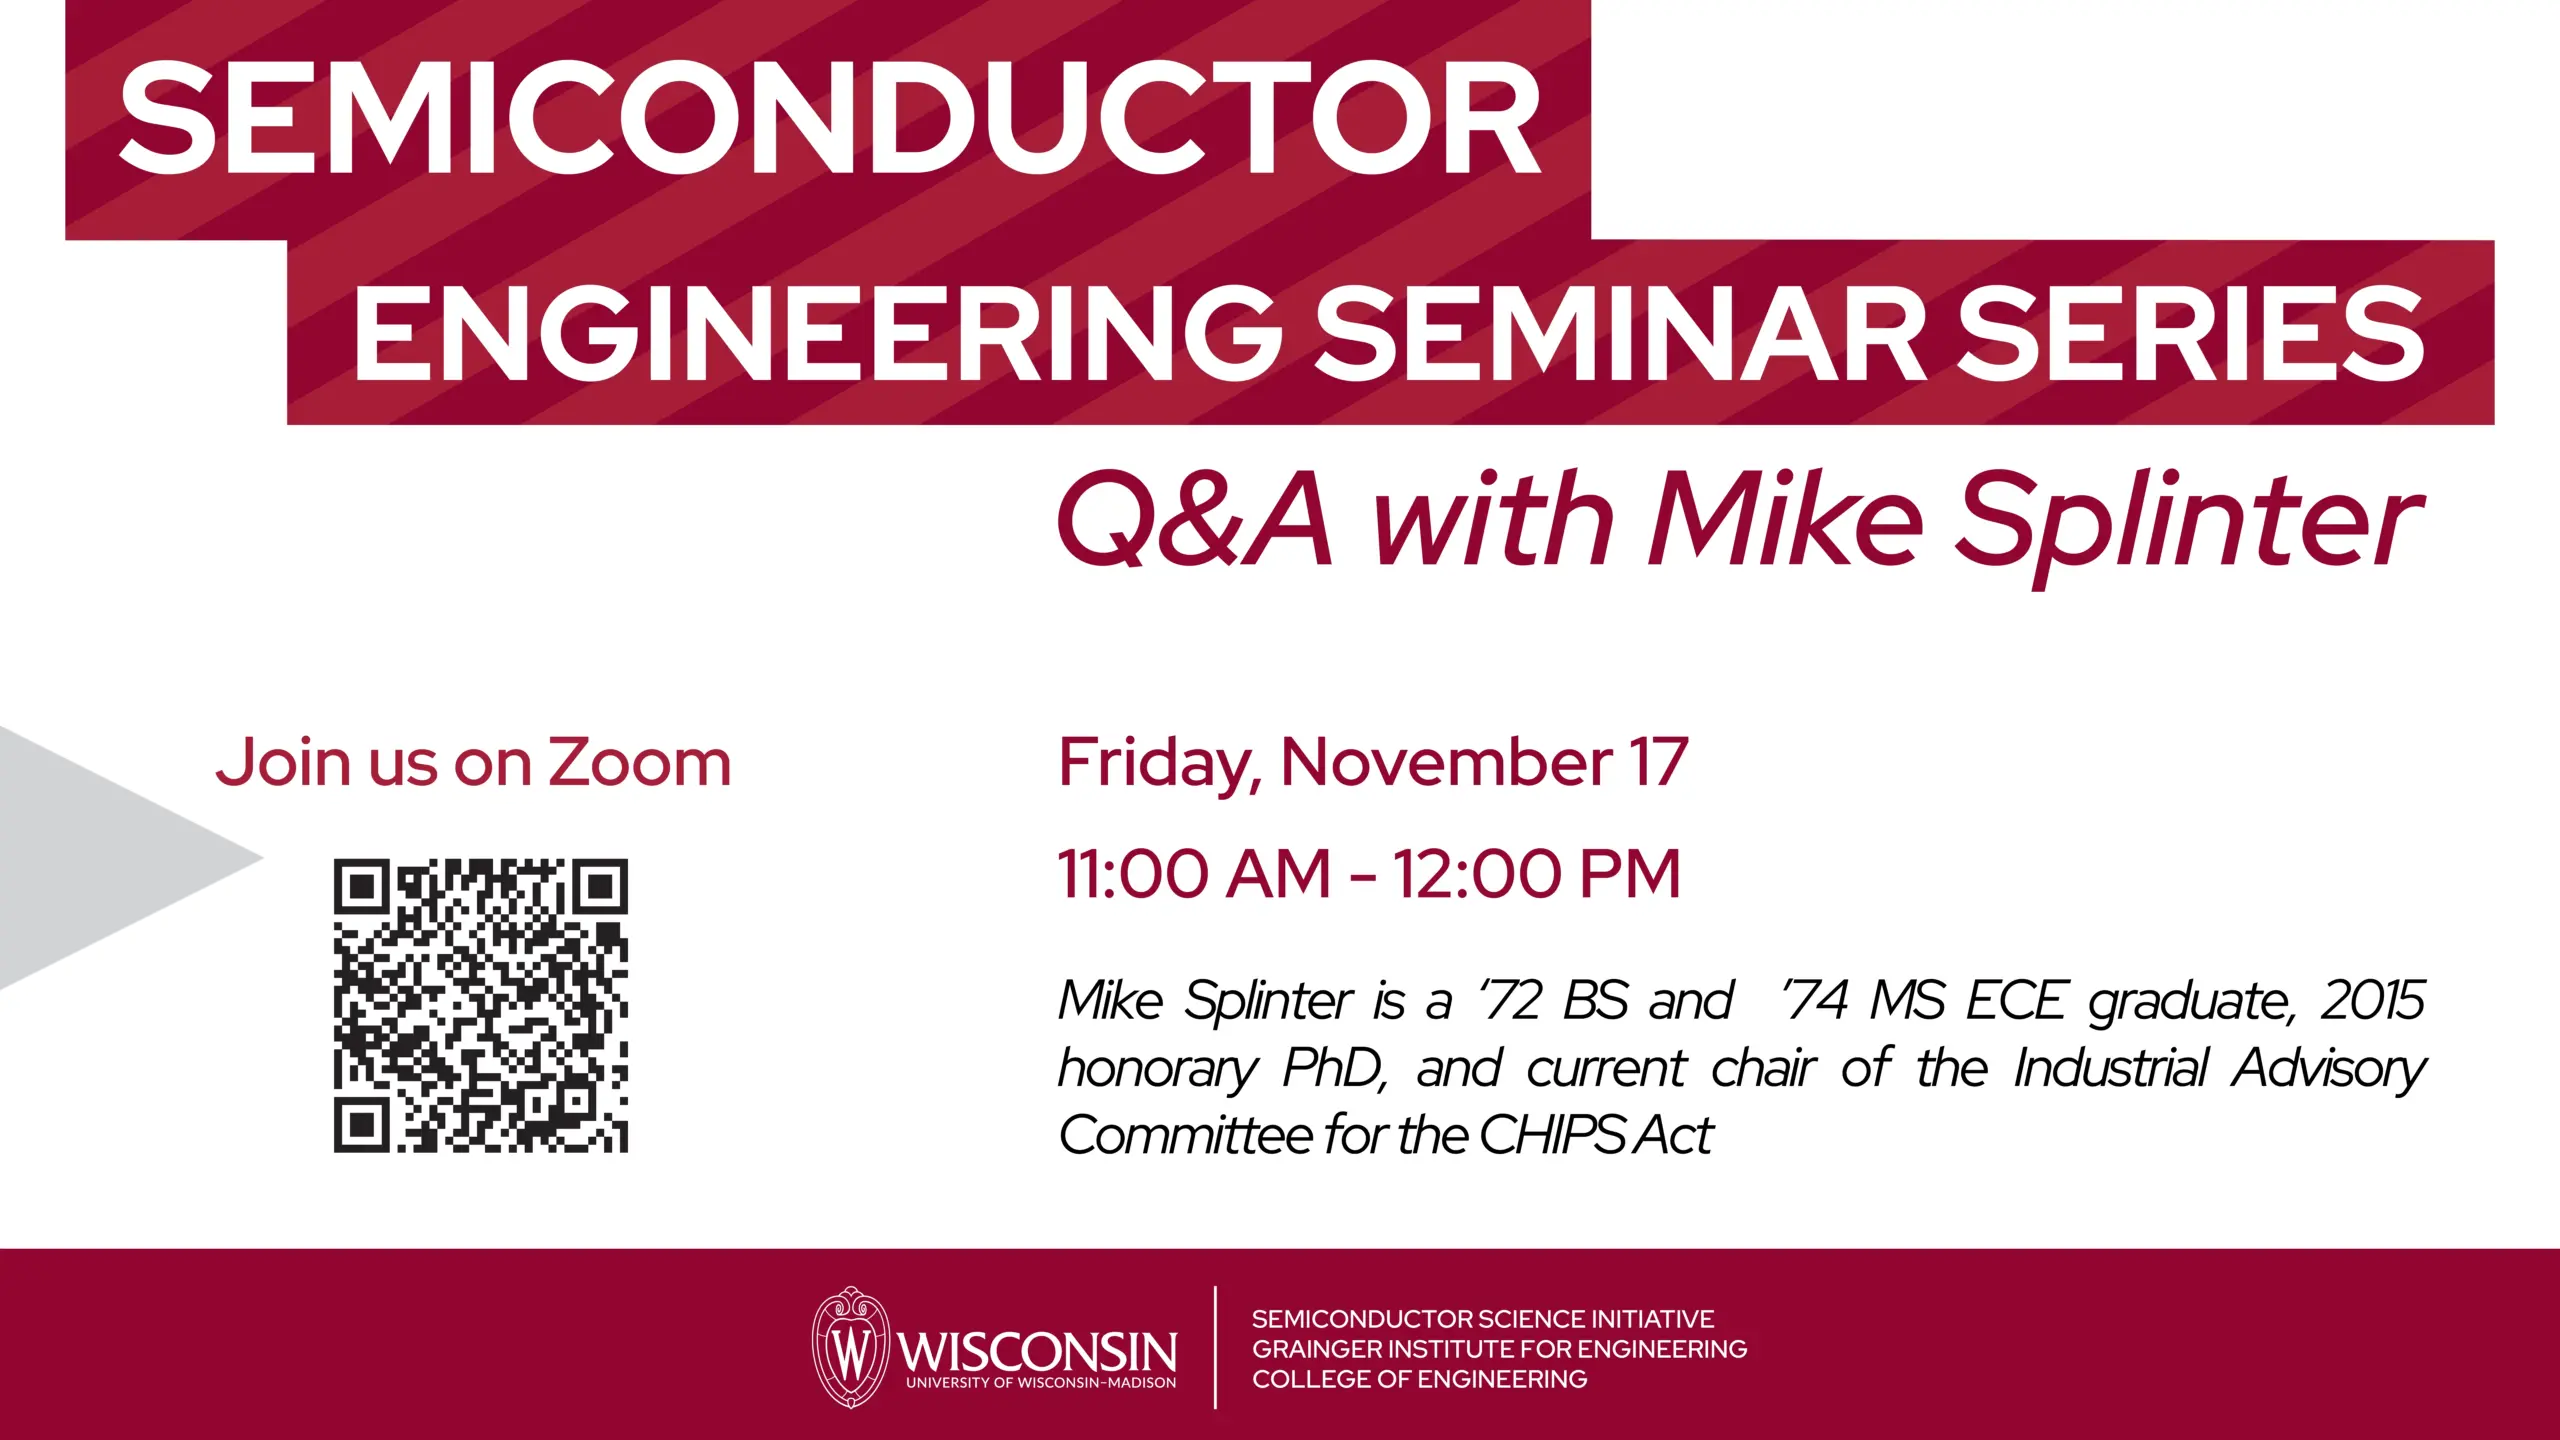 Semiconductor Engineering Seminar Series: Q&A with Mike Splinter